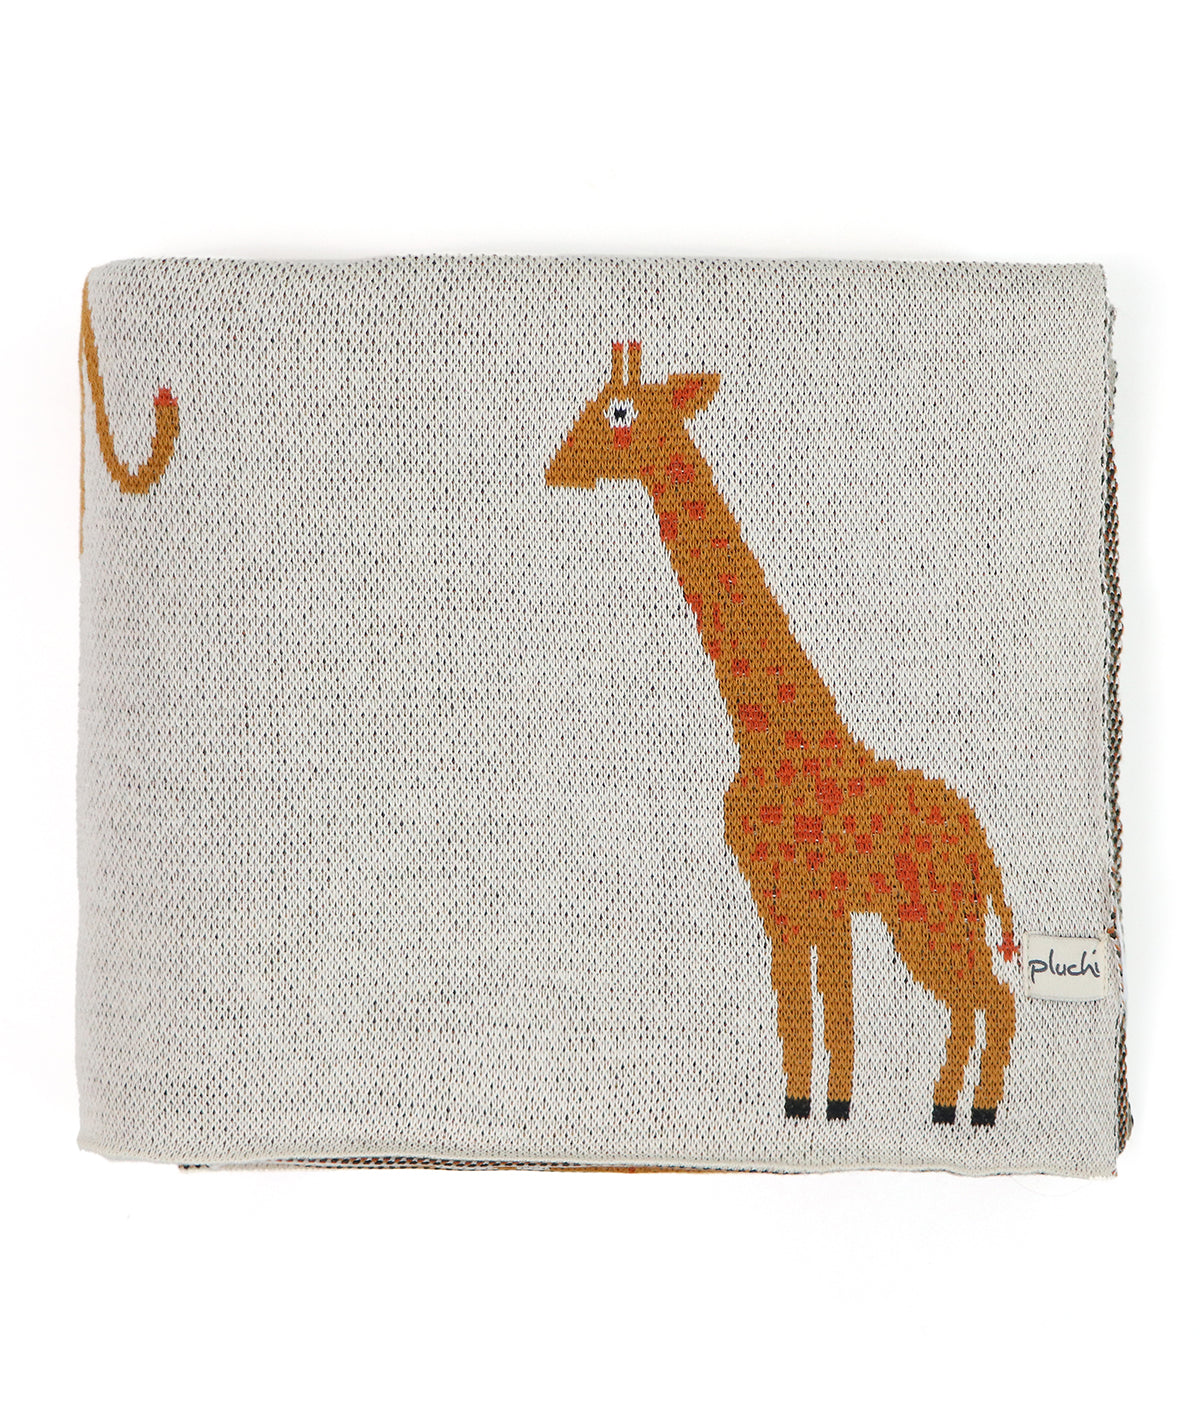 Wild Safari Natural & Multi Color Cotton Knitted Throw / Ac Blanket For Kids For Use In All Seasons